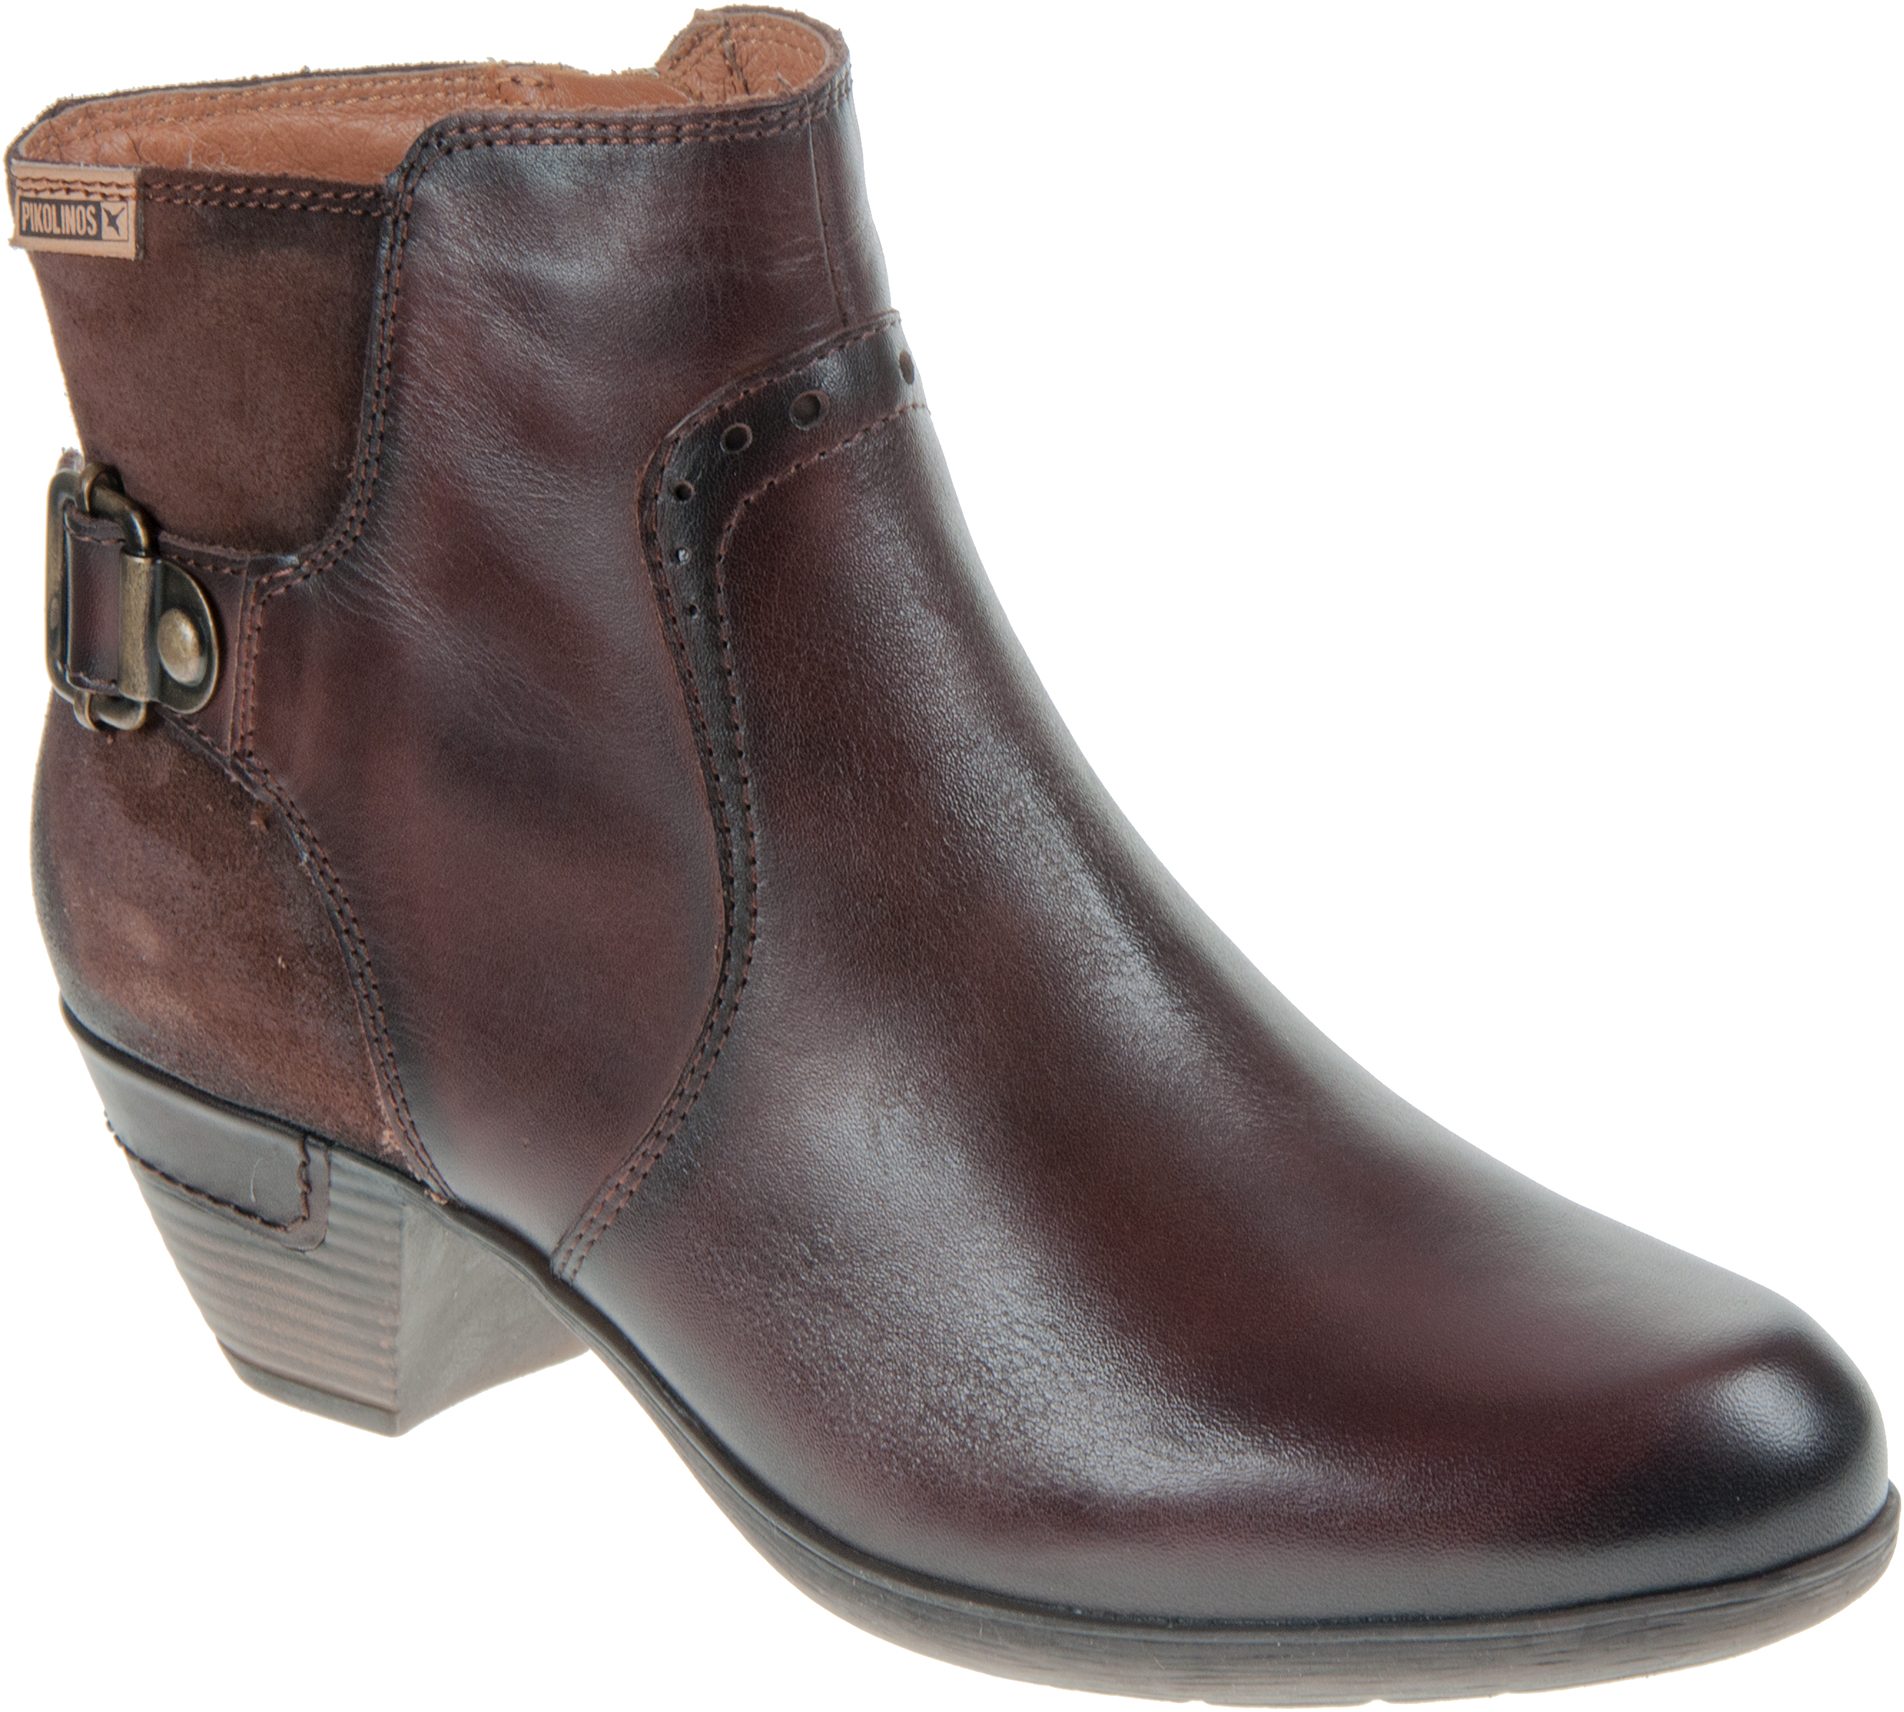 Pikolinos Rotterdam Olmo 902-9945 - Ankle Boots - Humphries Shoes